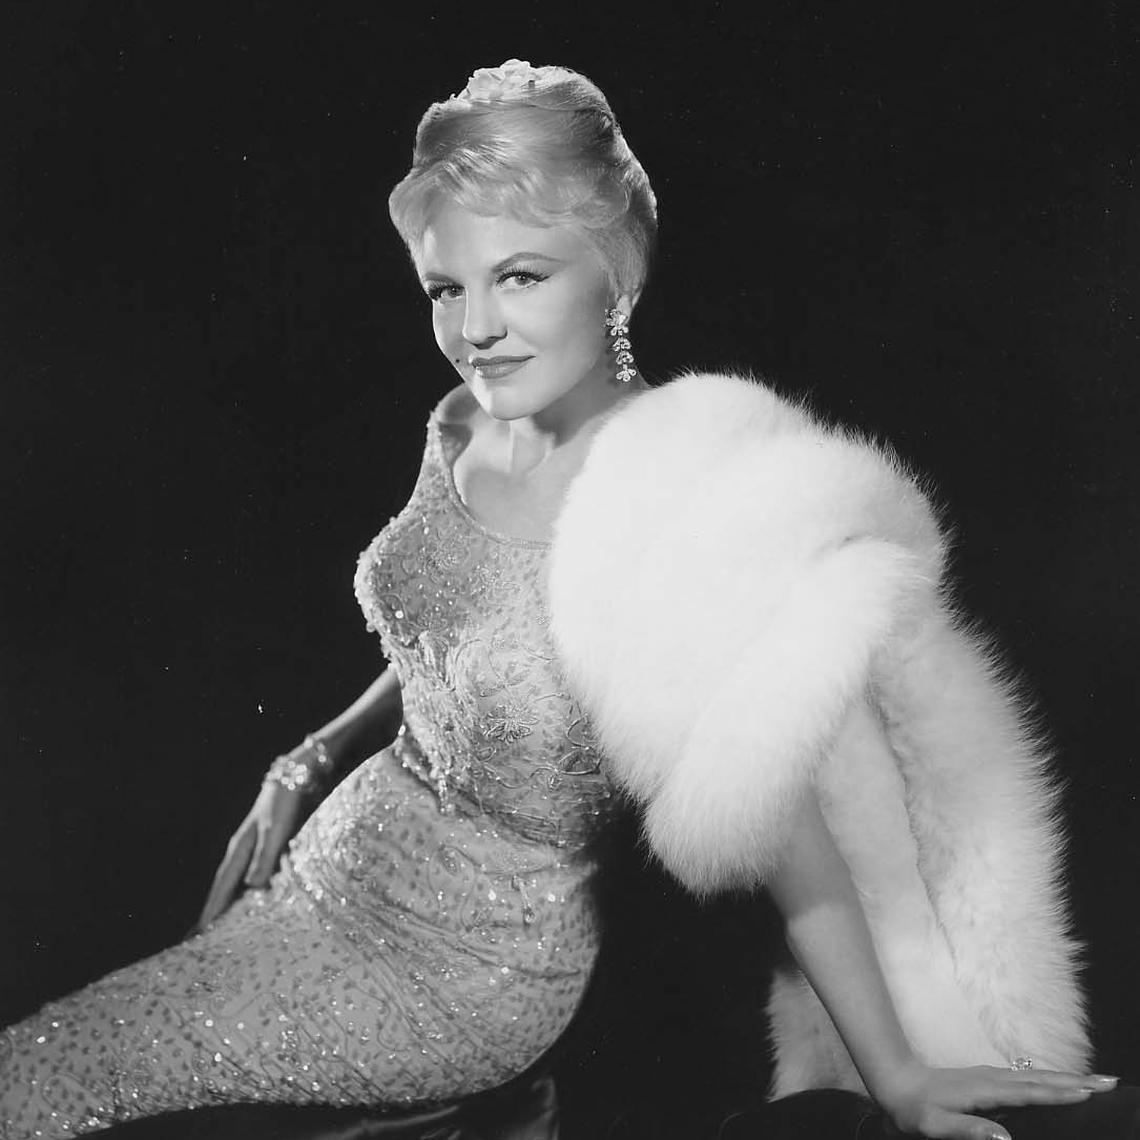 Is That All There Is? Not for North Dakota's Peggy Lee, Whose Music  Continues to Find New Fans - Peggy Lee